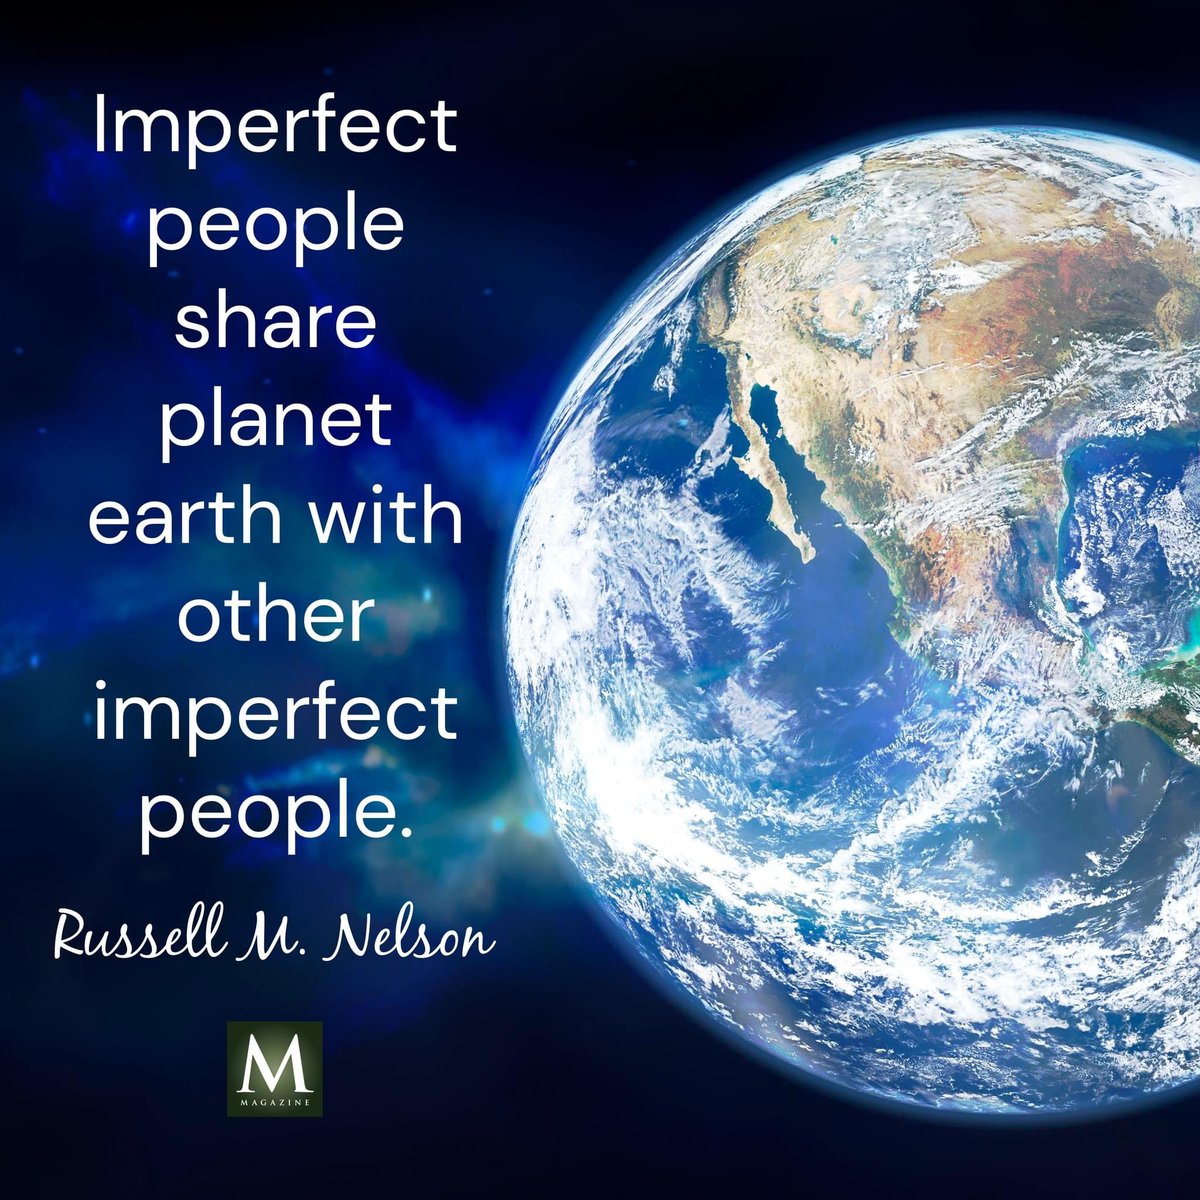 'Imperfect people share planet earth with other imperfect people.' ~ President Russell M. Nelson 

#TrustGod #ShareGoodness #HisDay #Christmas #LightTheWorld #BestDay #ShareTheJoy #BirthOfChrist #LoveOneAnother #ChildrenOfGod #CountOnHim #TheChurchOfJesusChristOfLatterDaySaints